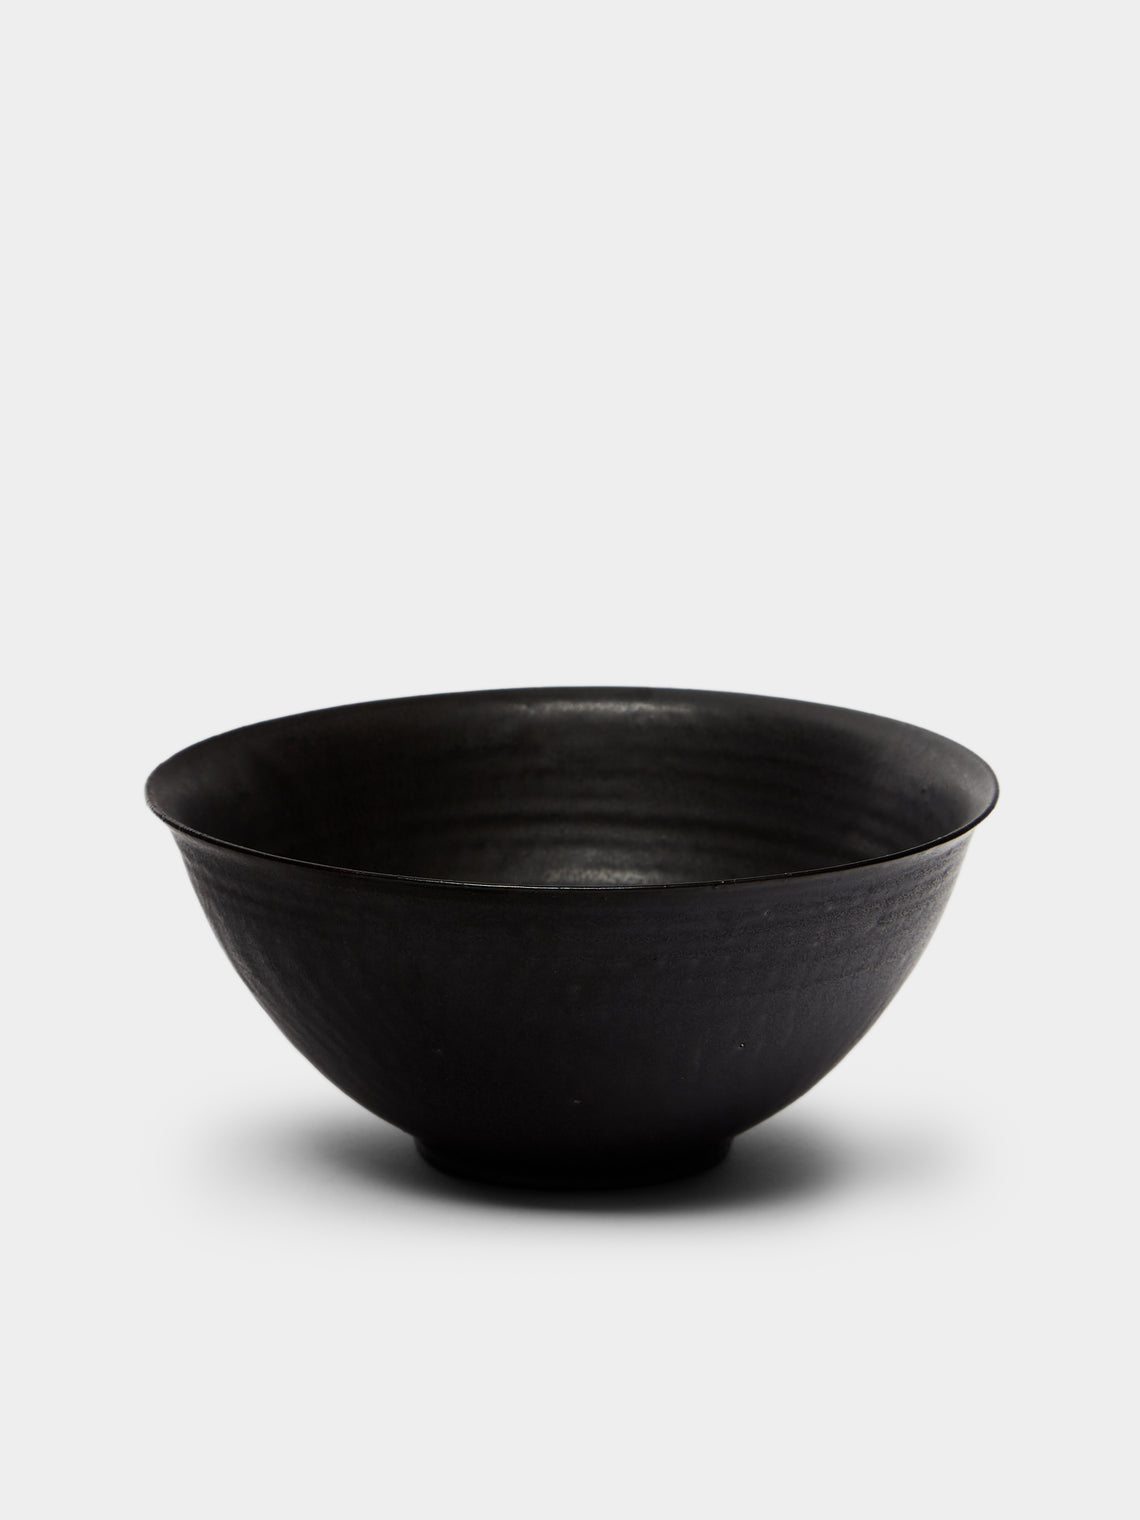 Lee Song-am - Black Clay Large Bowls (Set of 4) -  - ABASK - 